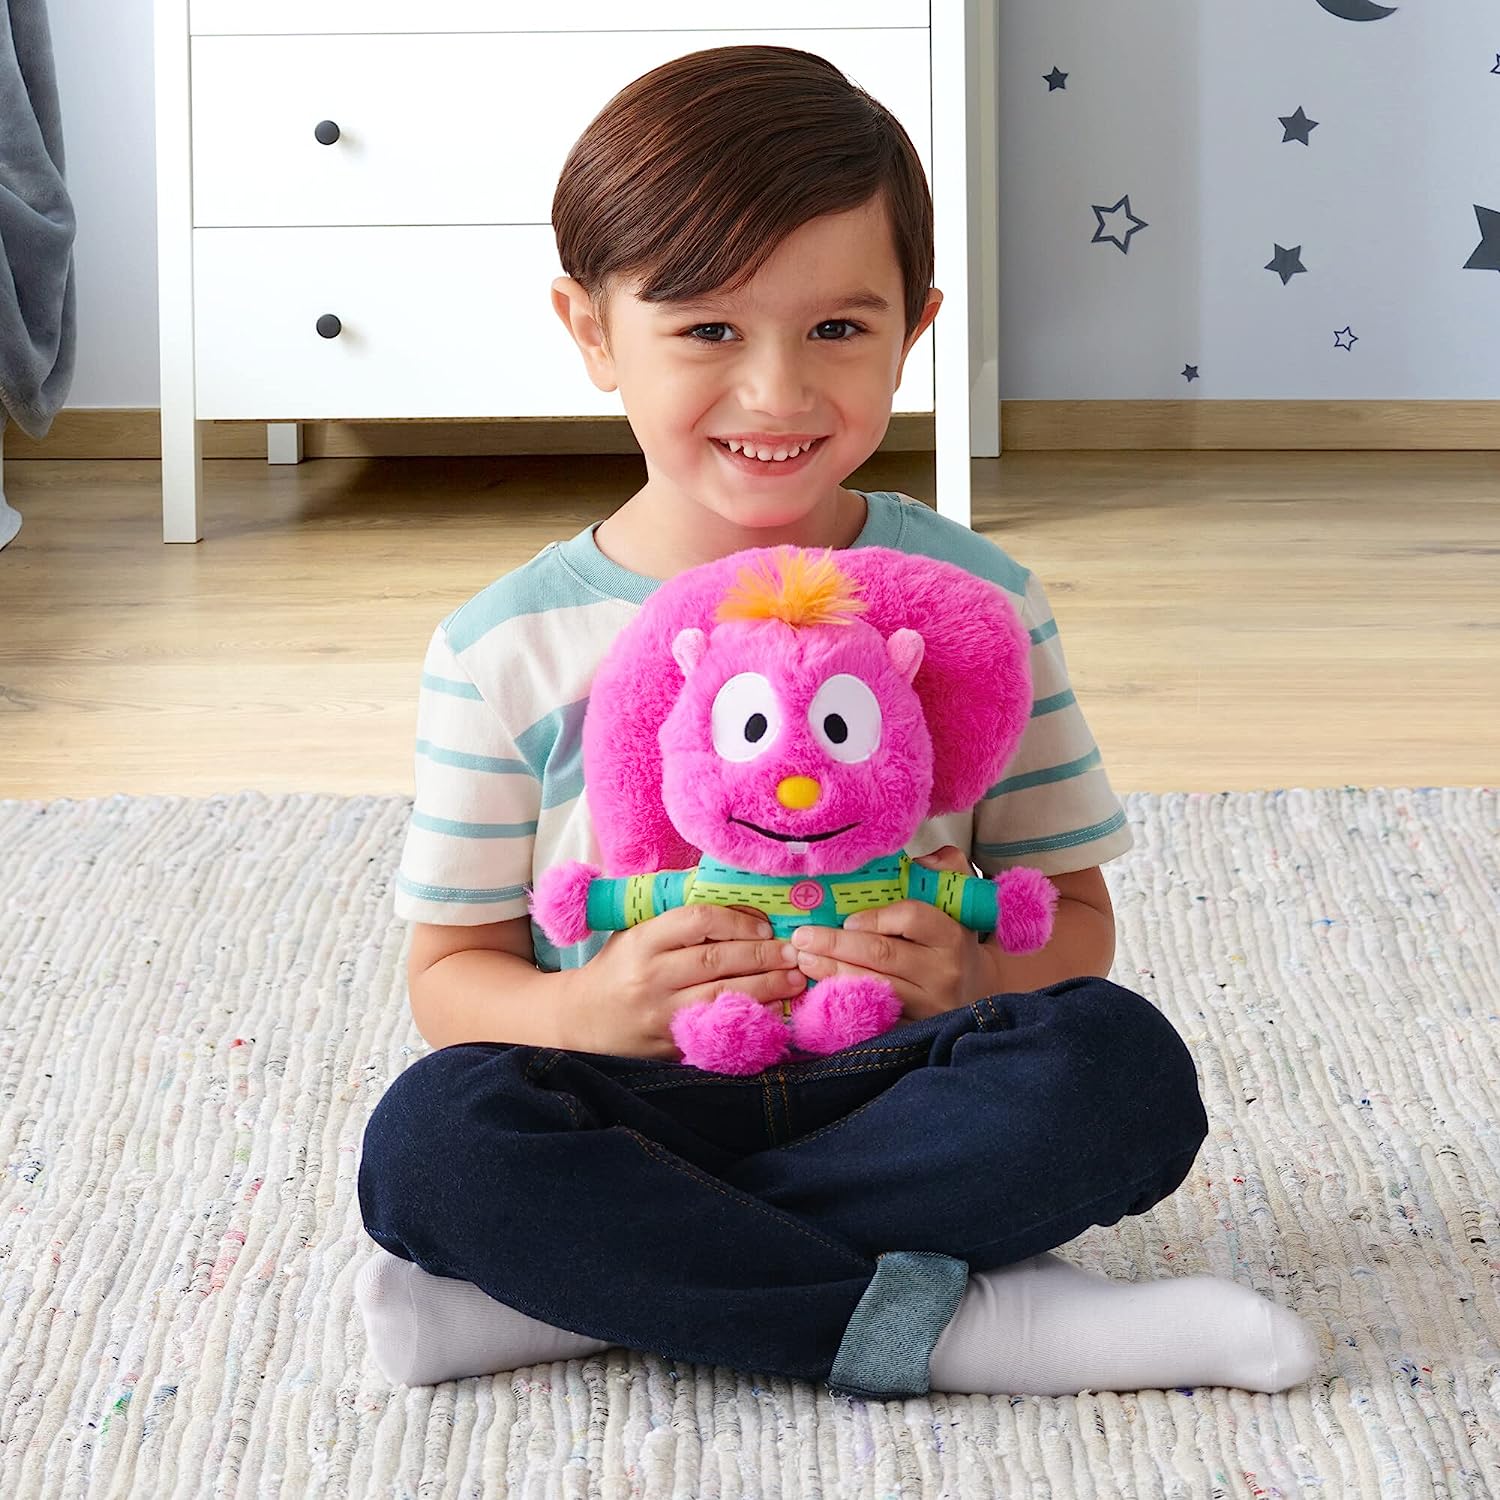 Amazon Prime Members: 10" Blippi Treehouse: Patch The Squirrel Plush Toy $2.49 + Free Shipping